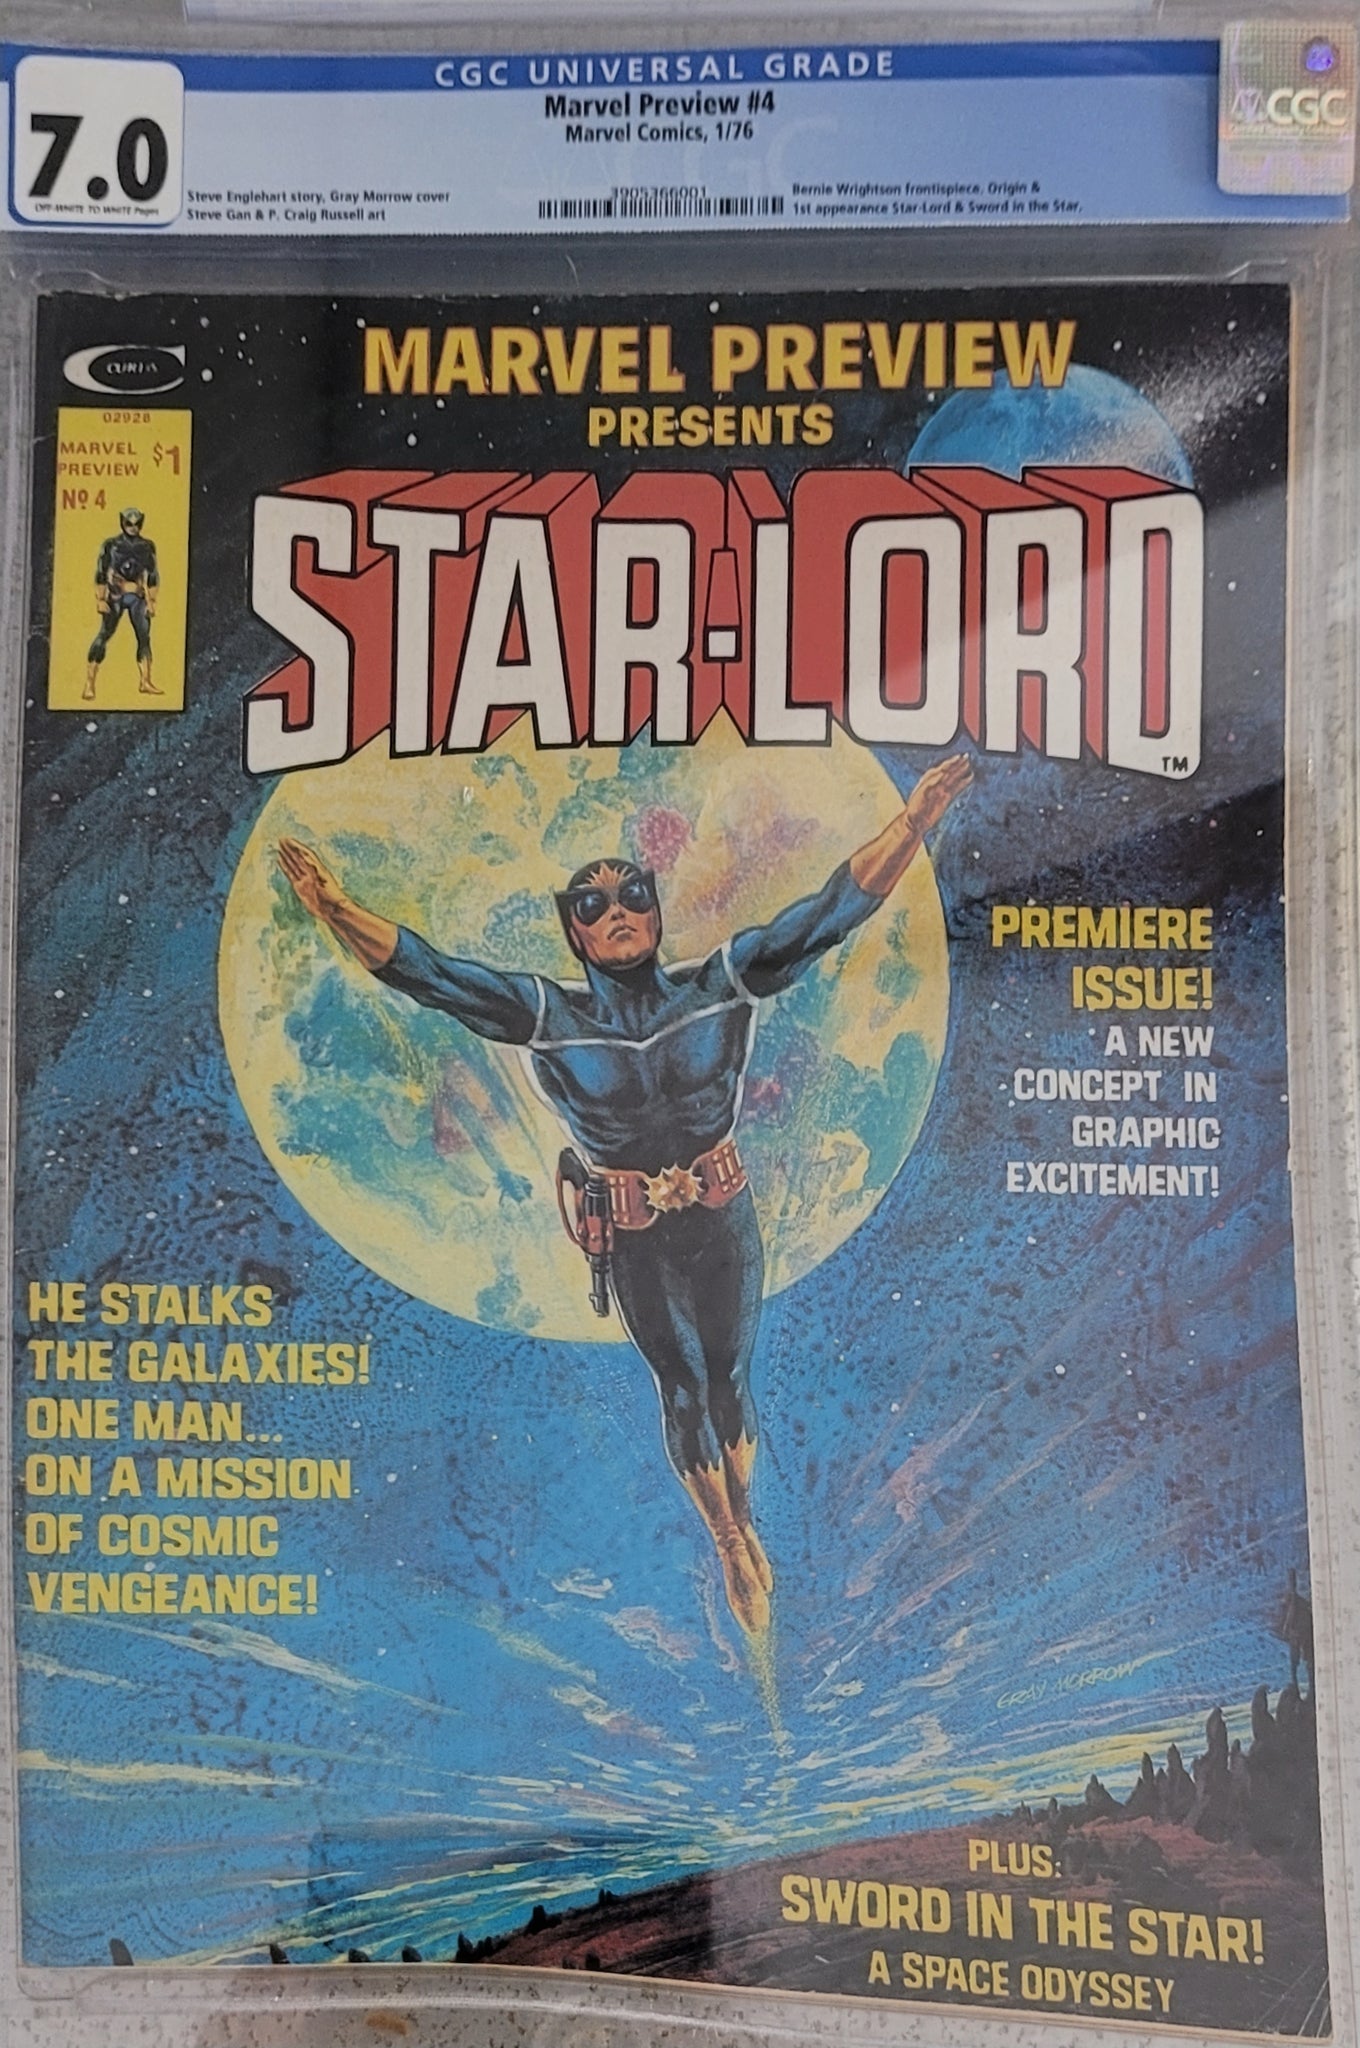 The Origins of Star-Lord